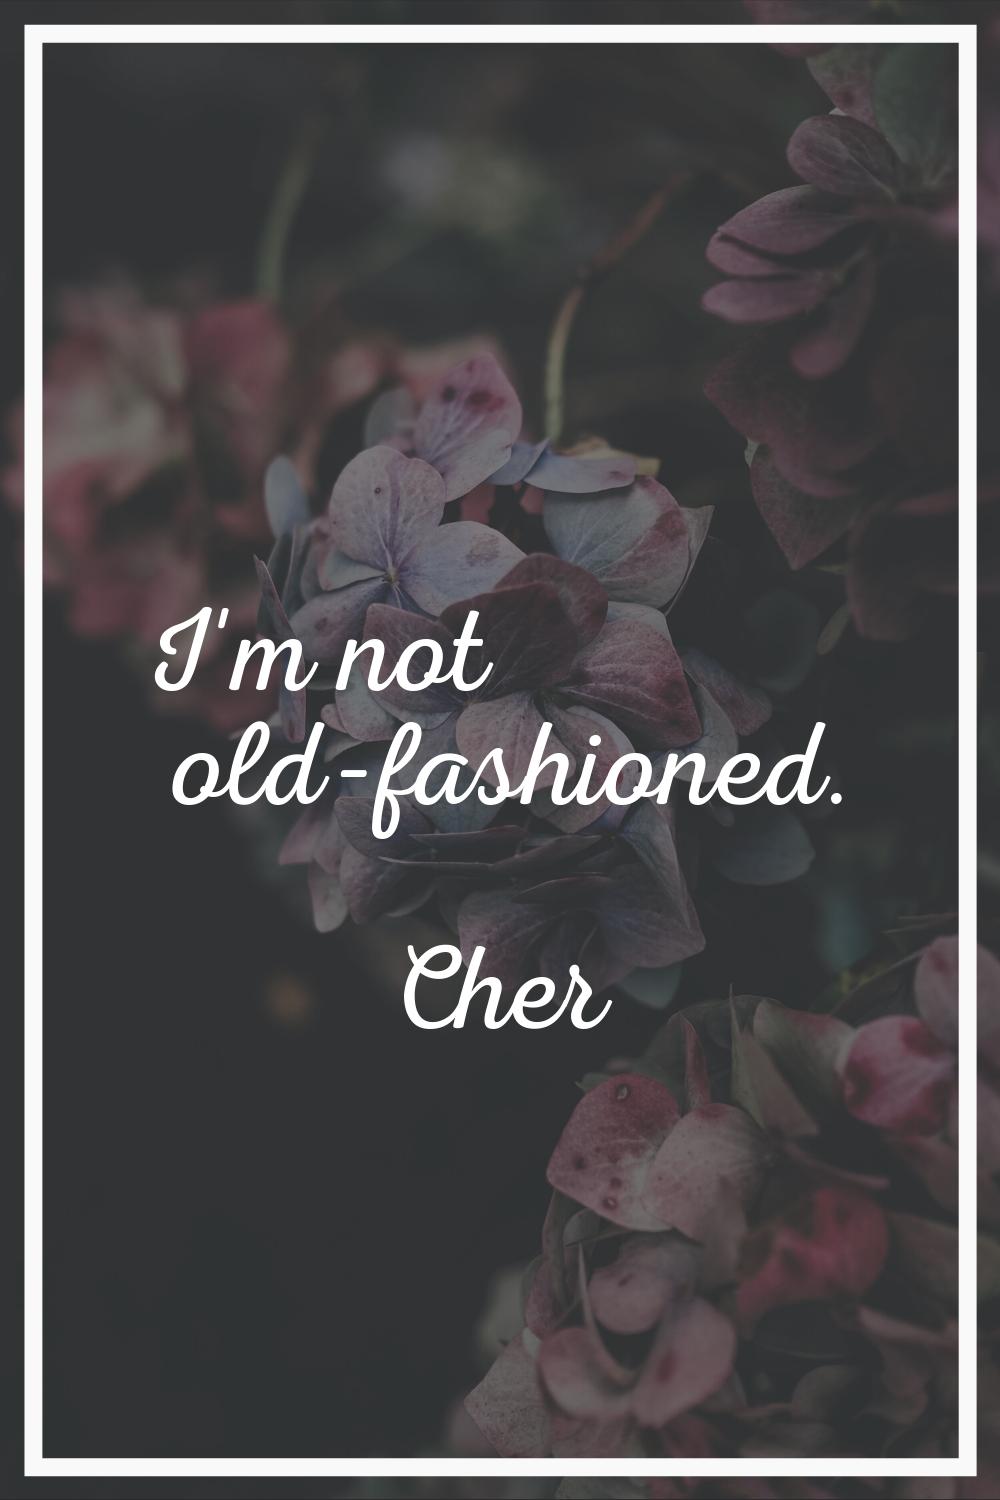 I'm not old-fashioned.